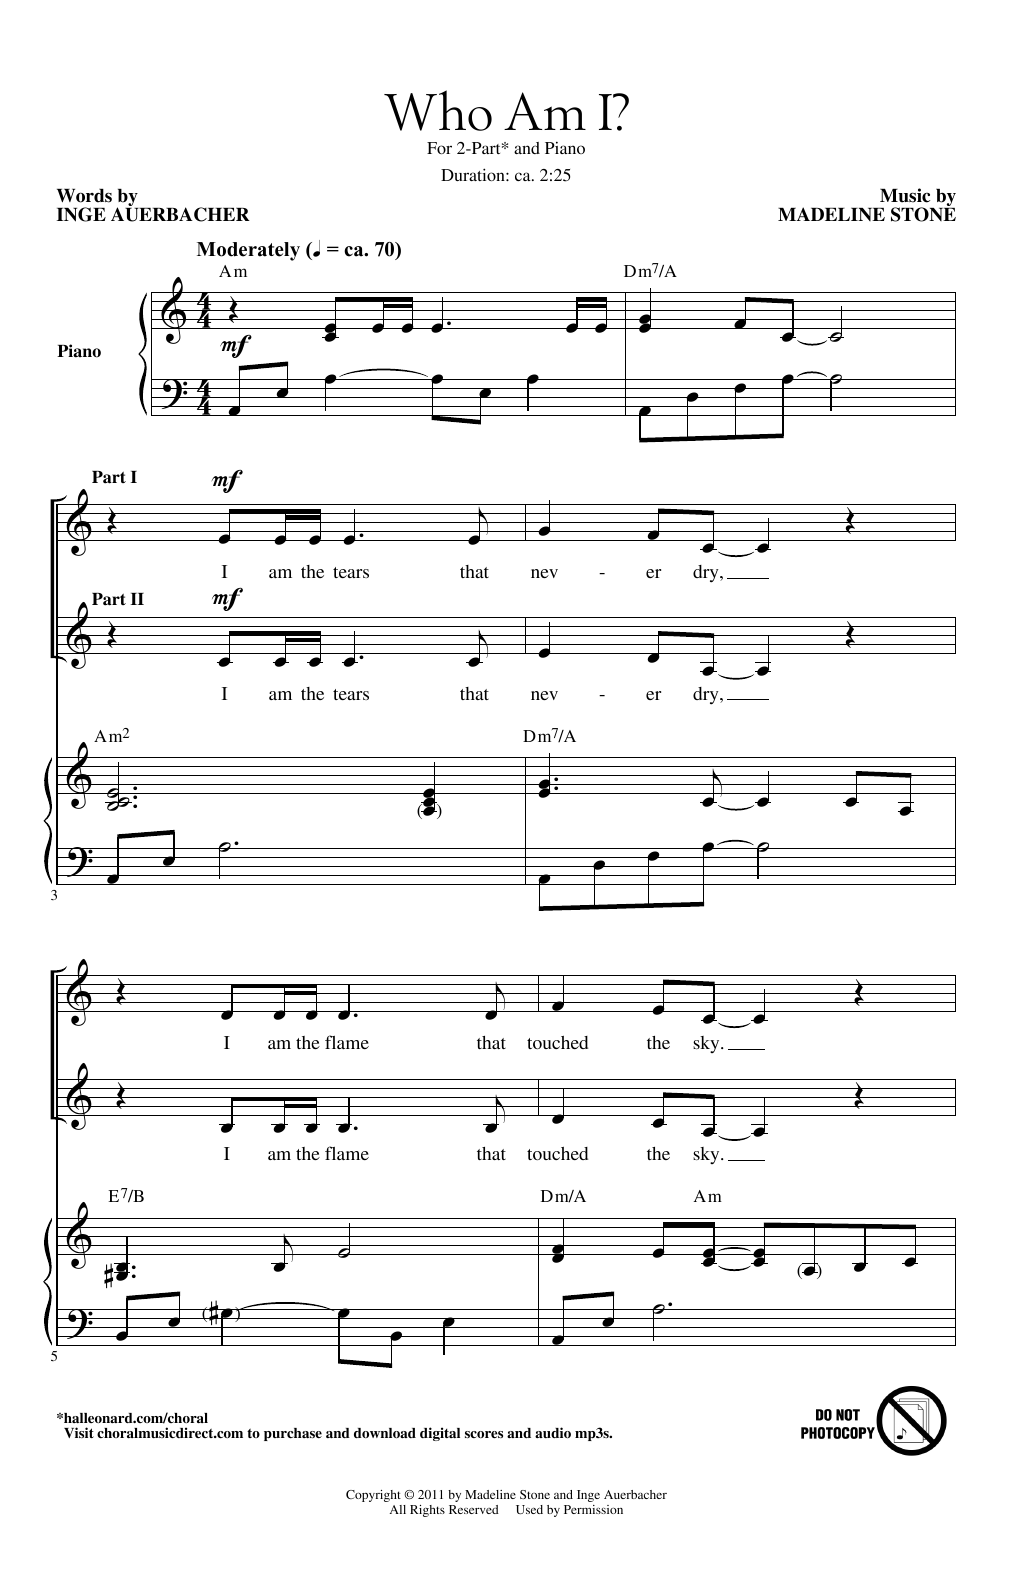 Download Madeline Stone Who Am I? Sheet Music